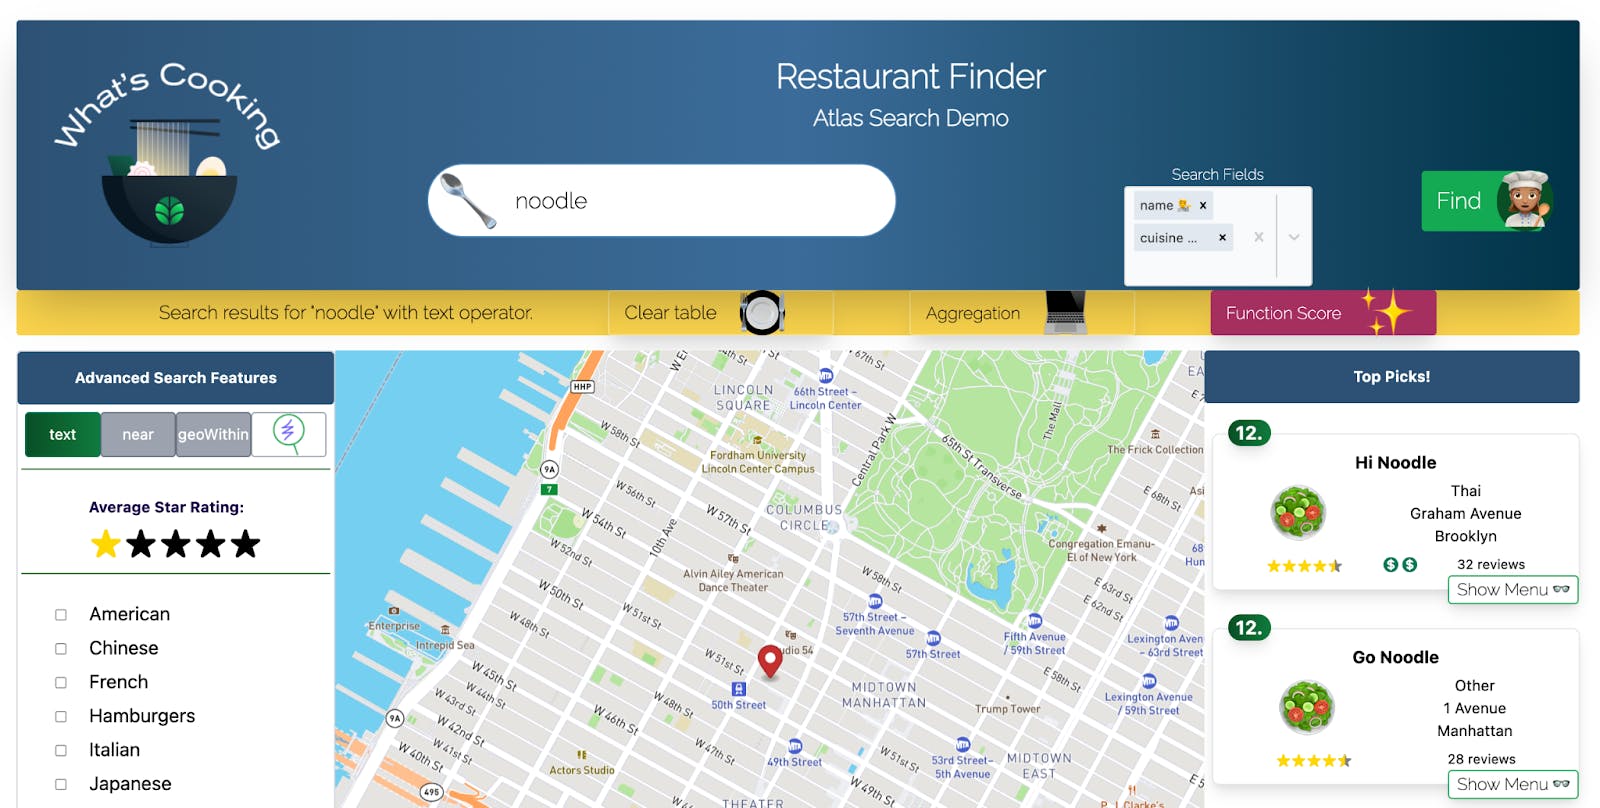 What’s Cooking: a sample restaurant finder application using MongoDB Atlas Search